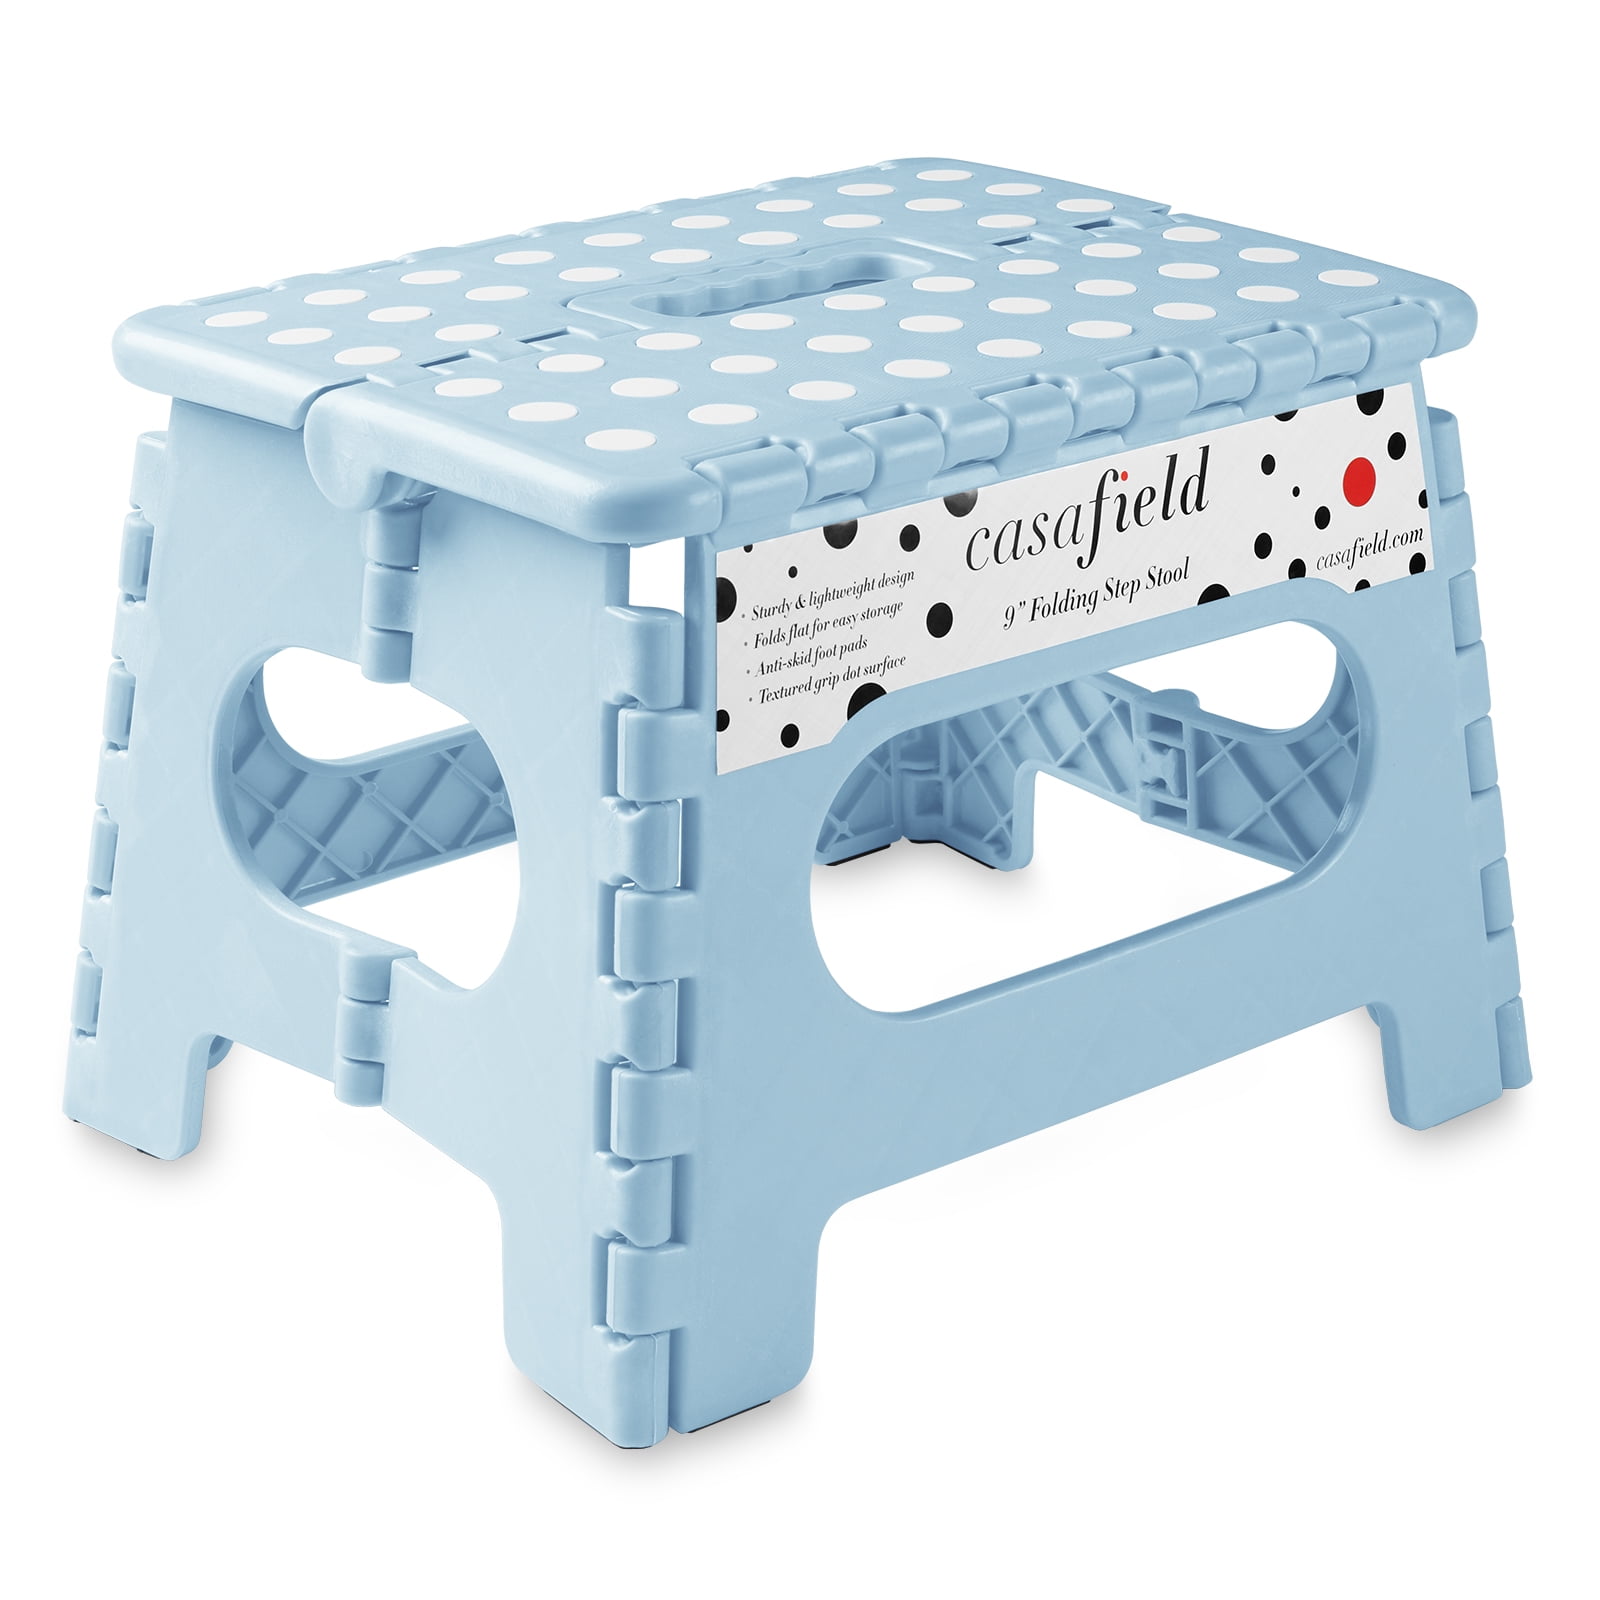 Zplyer ChildrenS Stool Portable Footrest Foldable and Durable Is Very Suitable for Children and Adults Outdoors ChildrenS Plastic Chair Back Blue 